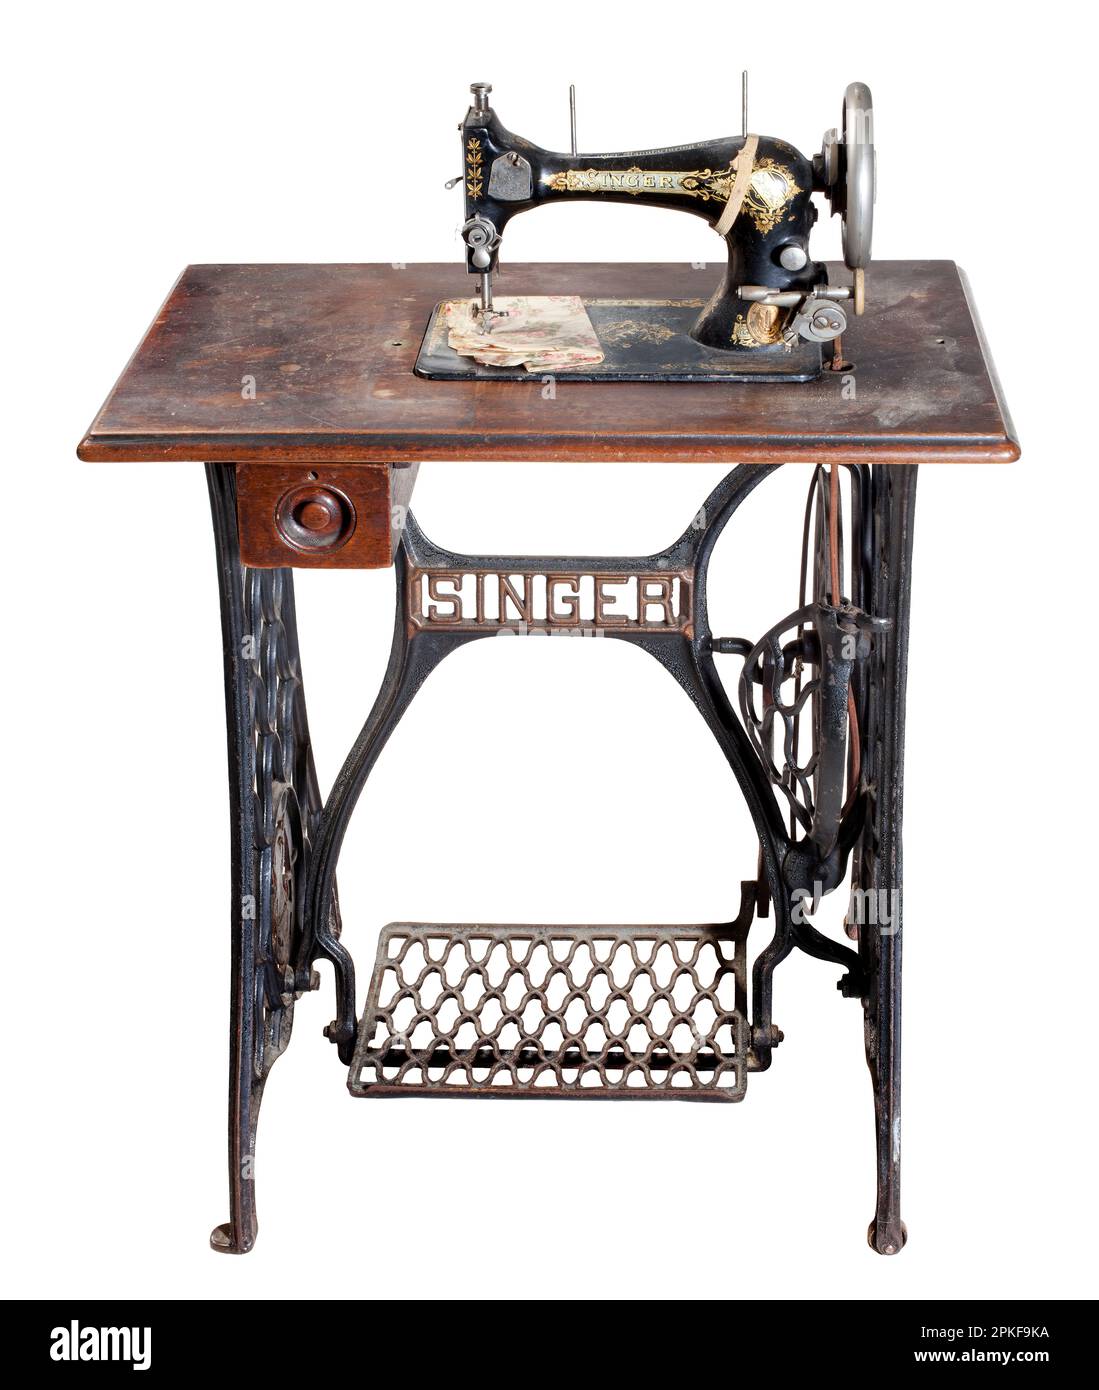 Old sewing machine, Singer, Germany, 20th century Stock Photo